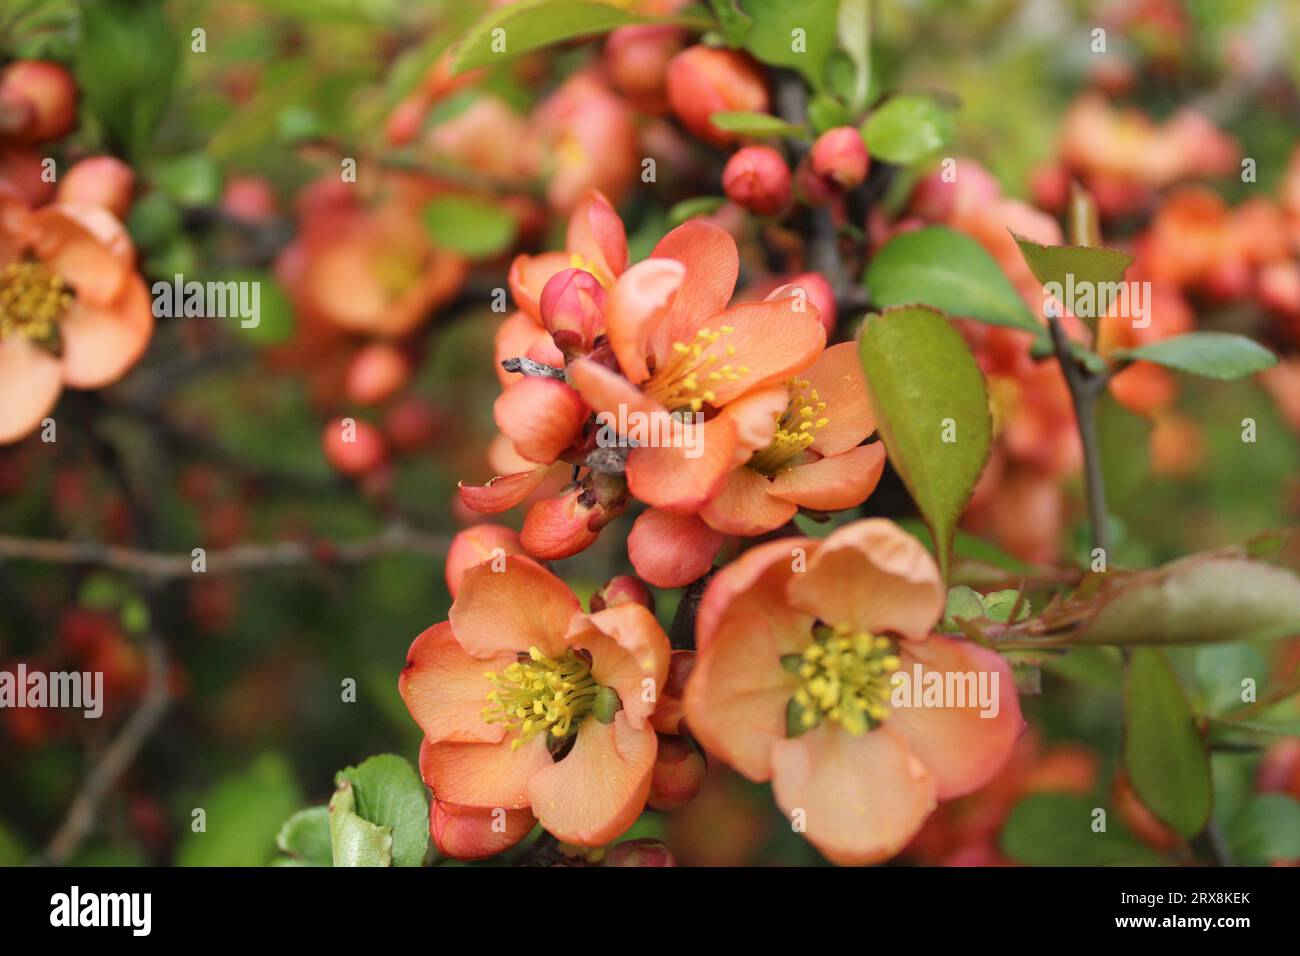 Japanese quince chenomeles henomeles small orange flowers on a branch. Spring, flowering, blooming, flowers, summer Stock Photo